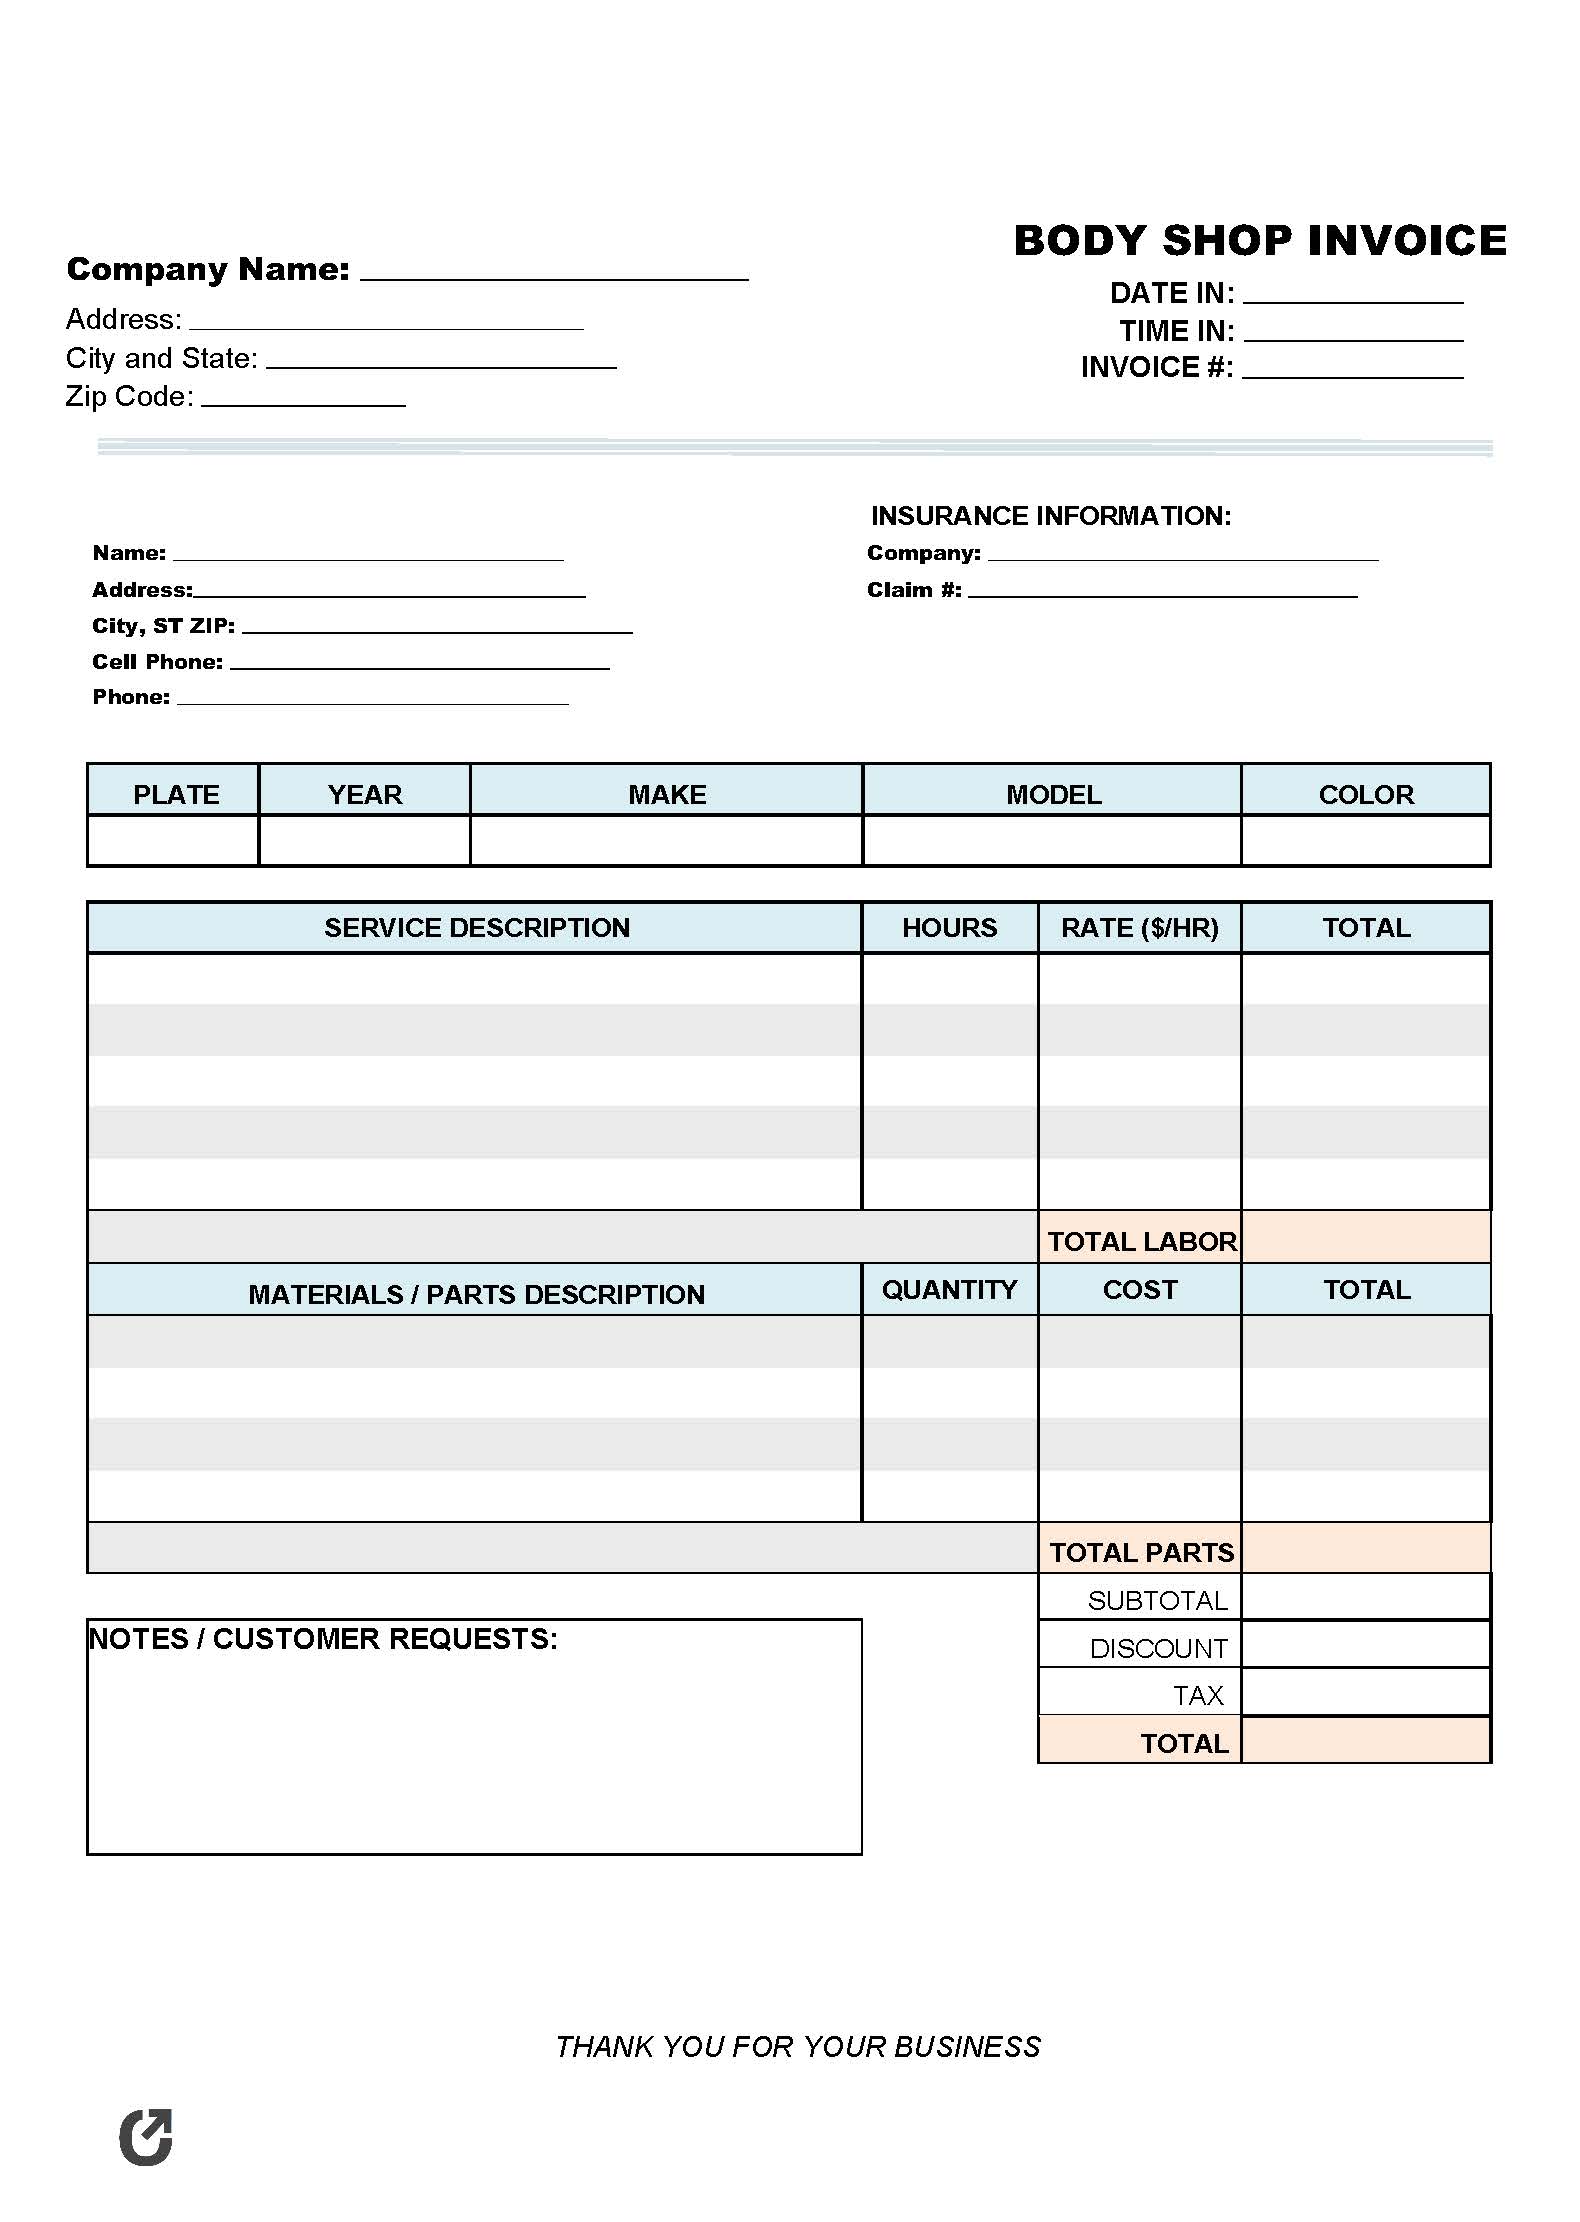 Free Body Shop Invoice Template  PDF  WORD  EXCEL Regarding Free Auto Repair Invoice Template Excel